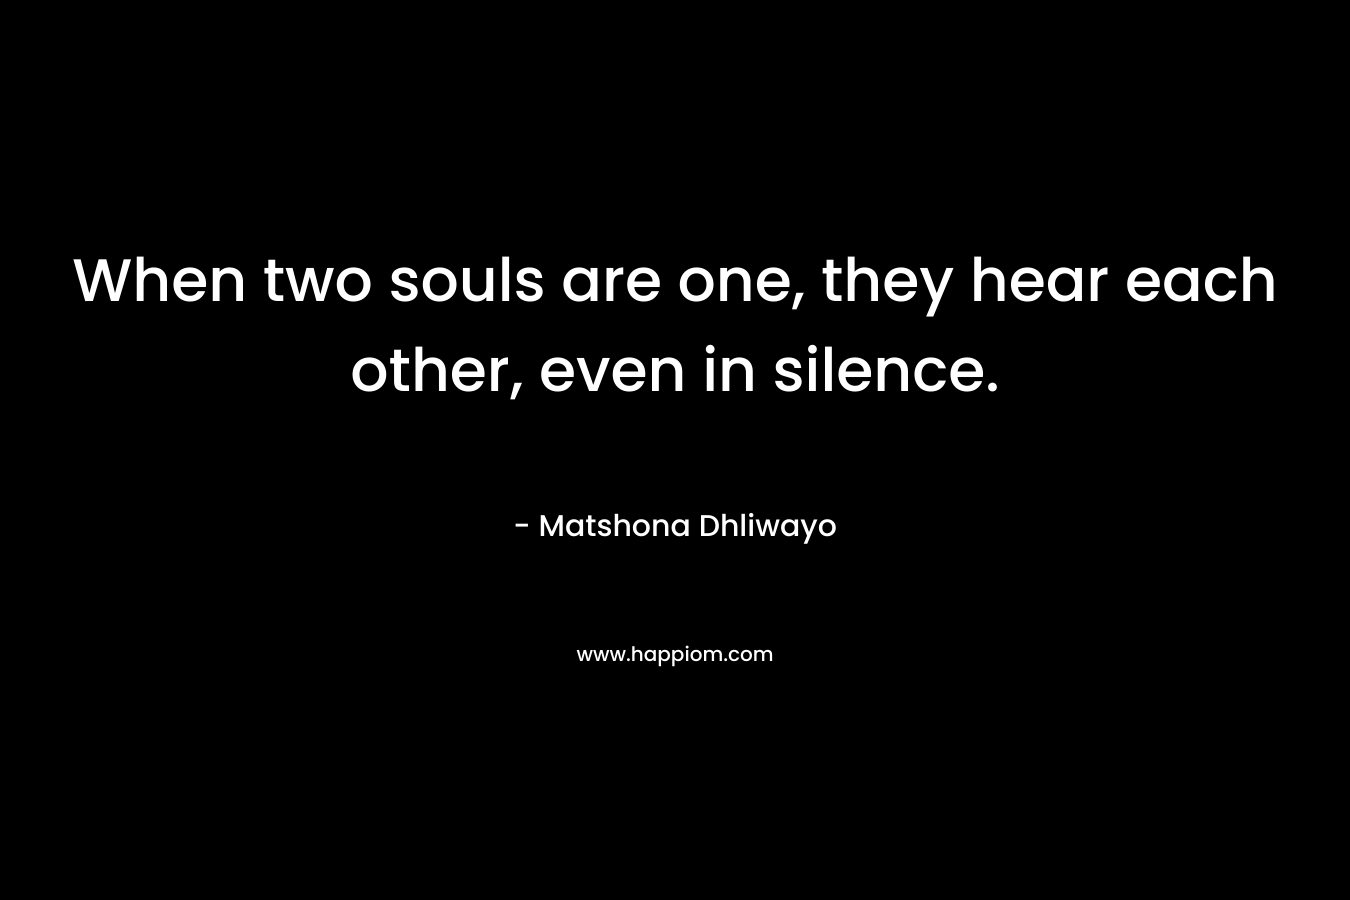 When two souls are one, they hear each other, even in silence.